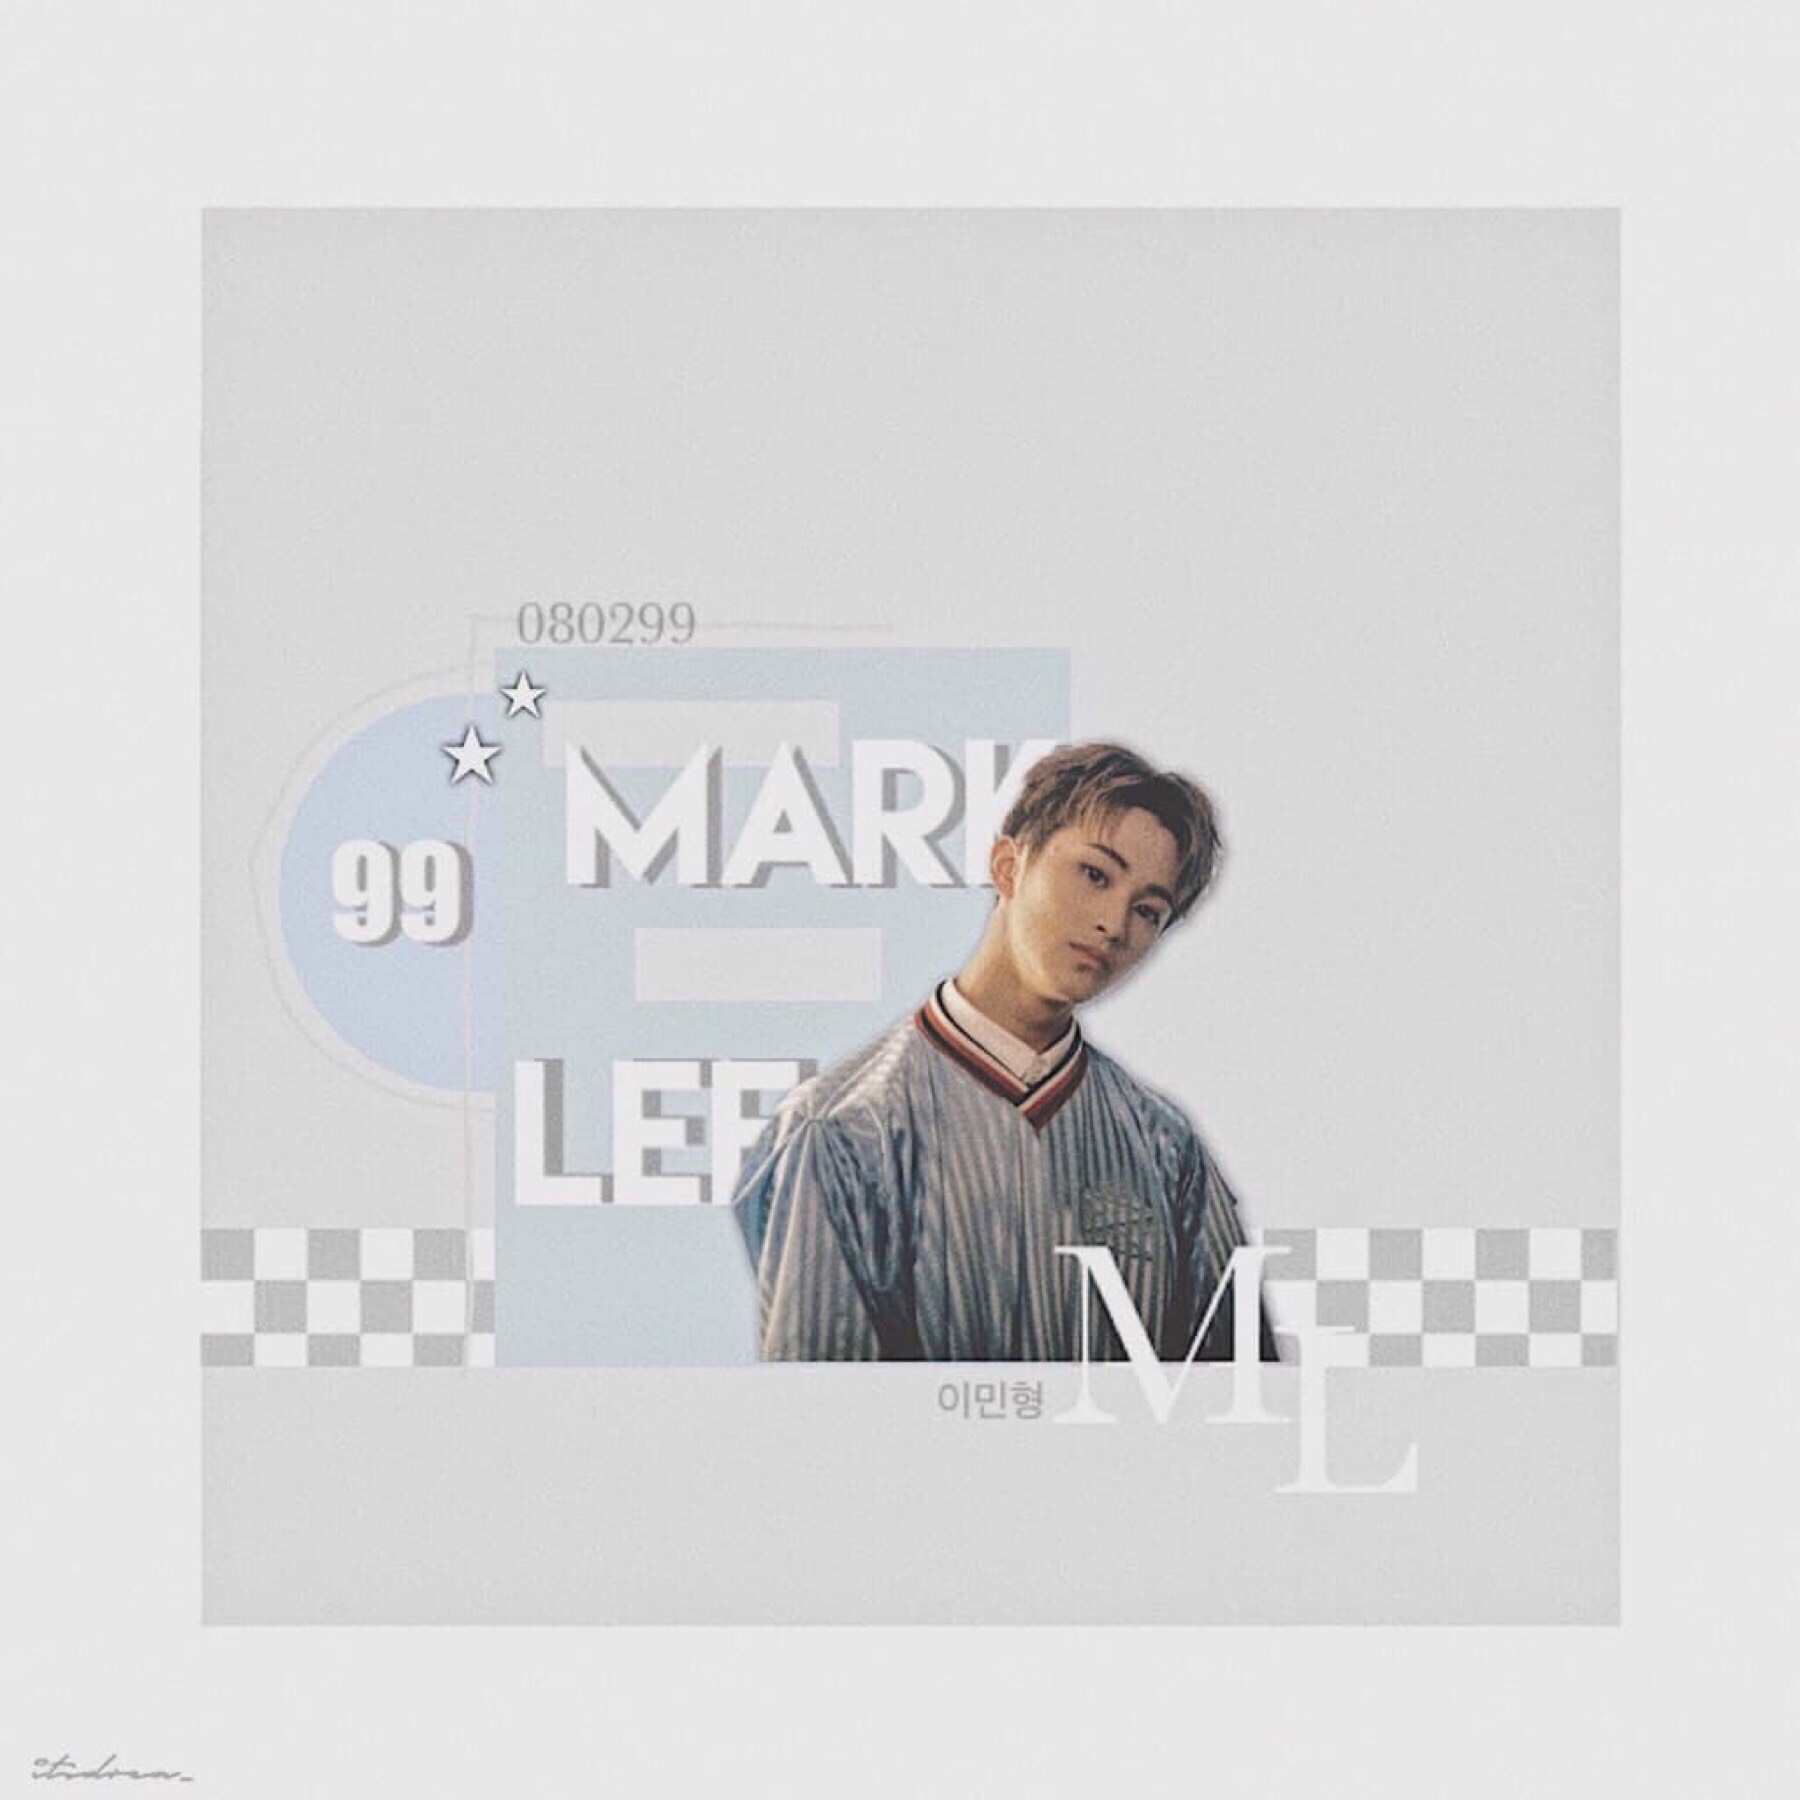 ♡
| veryyy old edit |
guys i'm so sad mark graduated. nct dream won't be same without him. but i hope he'll be getting more rest and not be too pressured. we love you mark!! PS WE'RE GETTING NCT CHINA/WAYV HOLY JISOO BLESS 2019